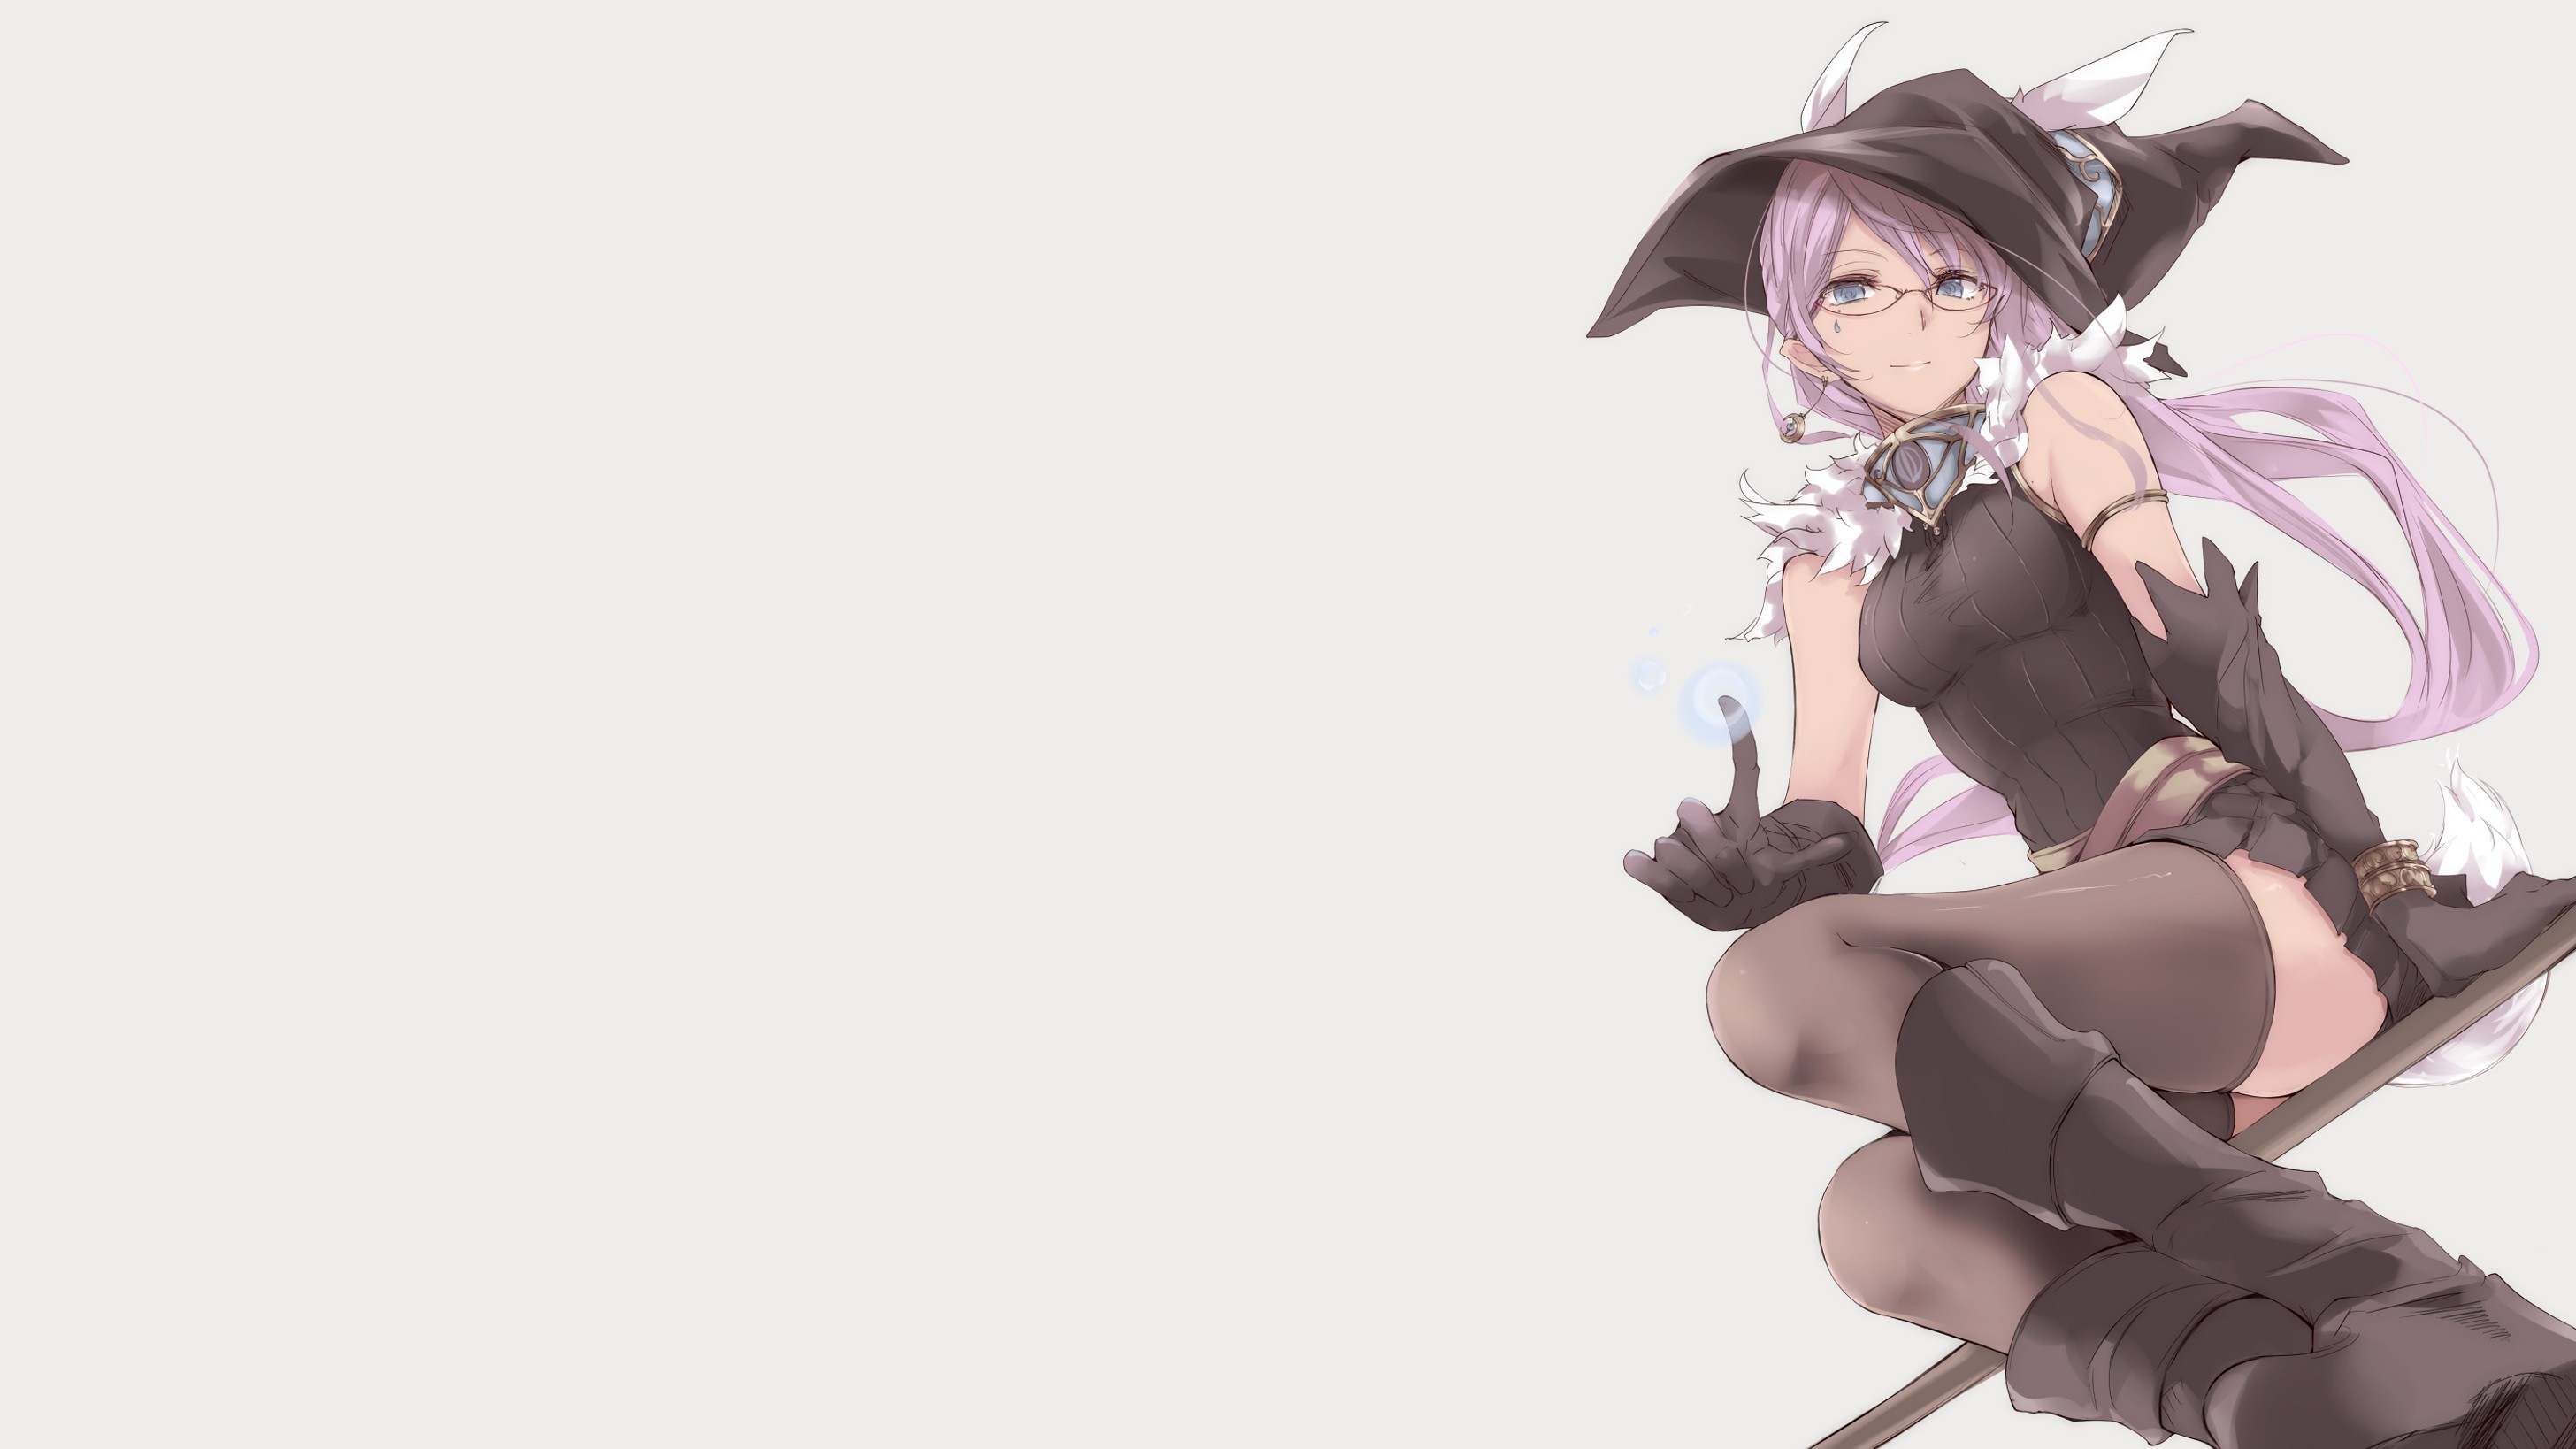 Anime 2912x1638 anime anime girls glasses hat skirt witch original characters fantasy art fantasy girl Pixiv women with glasses stockings purple hair long hair witch hat white background simple background